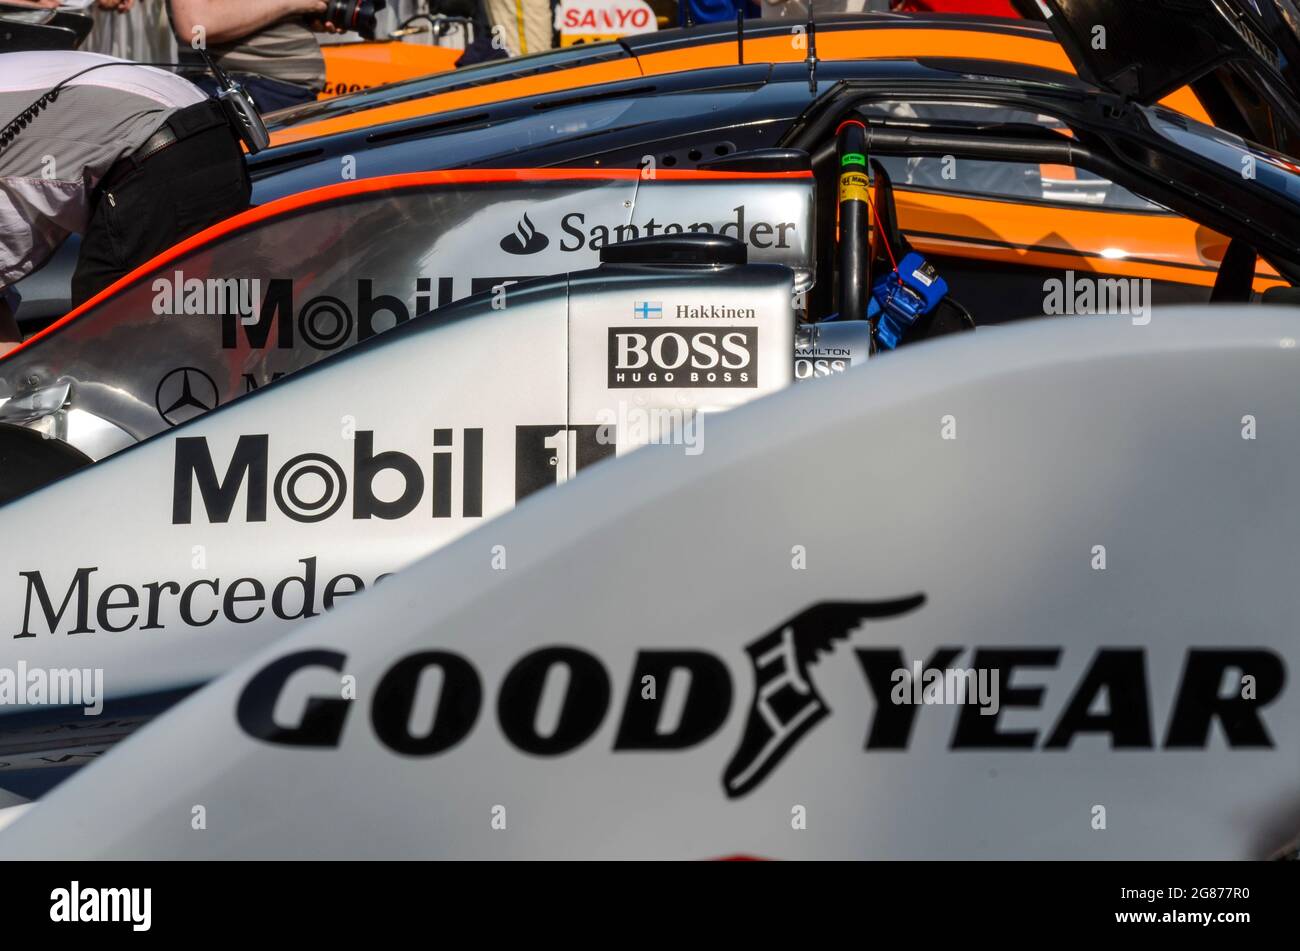 Row of McLaren Formula 1 Grand Prix racing cars at the Goodwood Festival of Speed 2013 to celebrate 50 years of McLaren Racing Limited Stock Photo